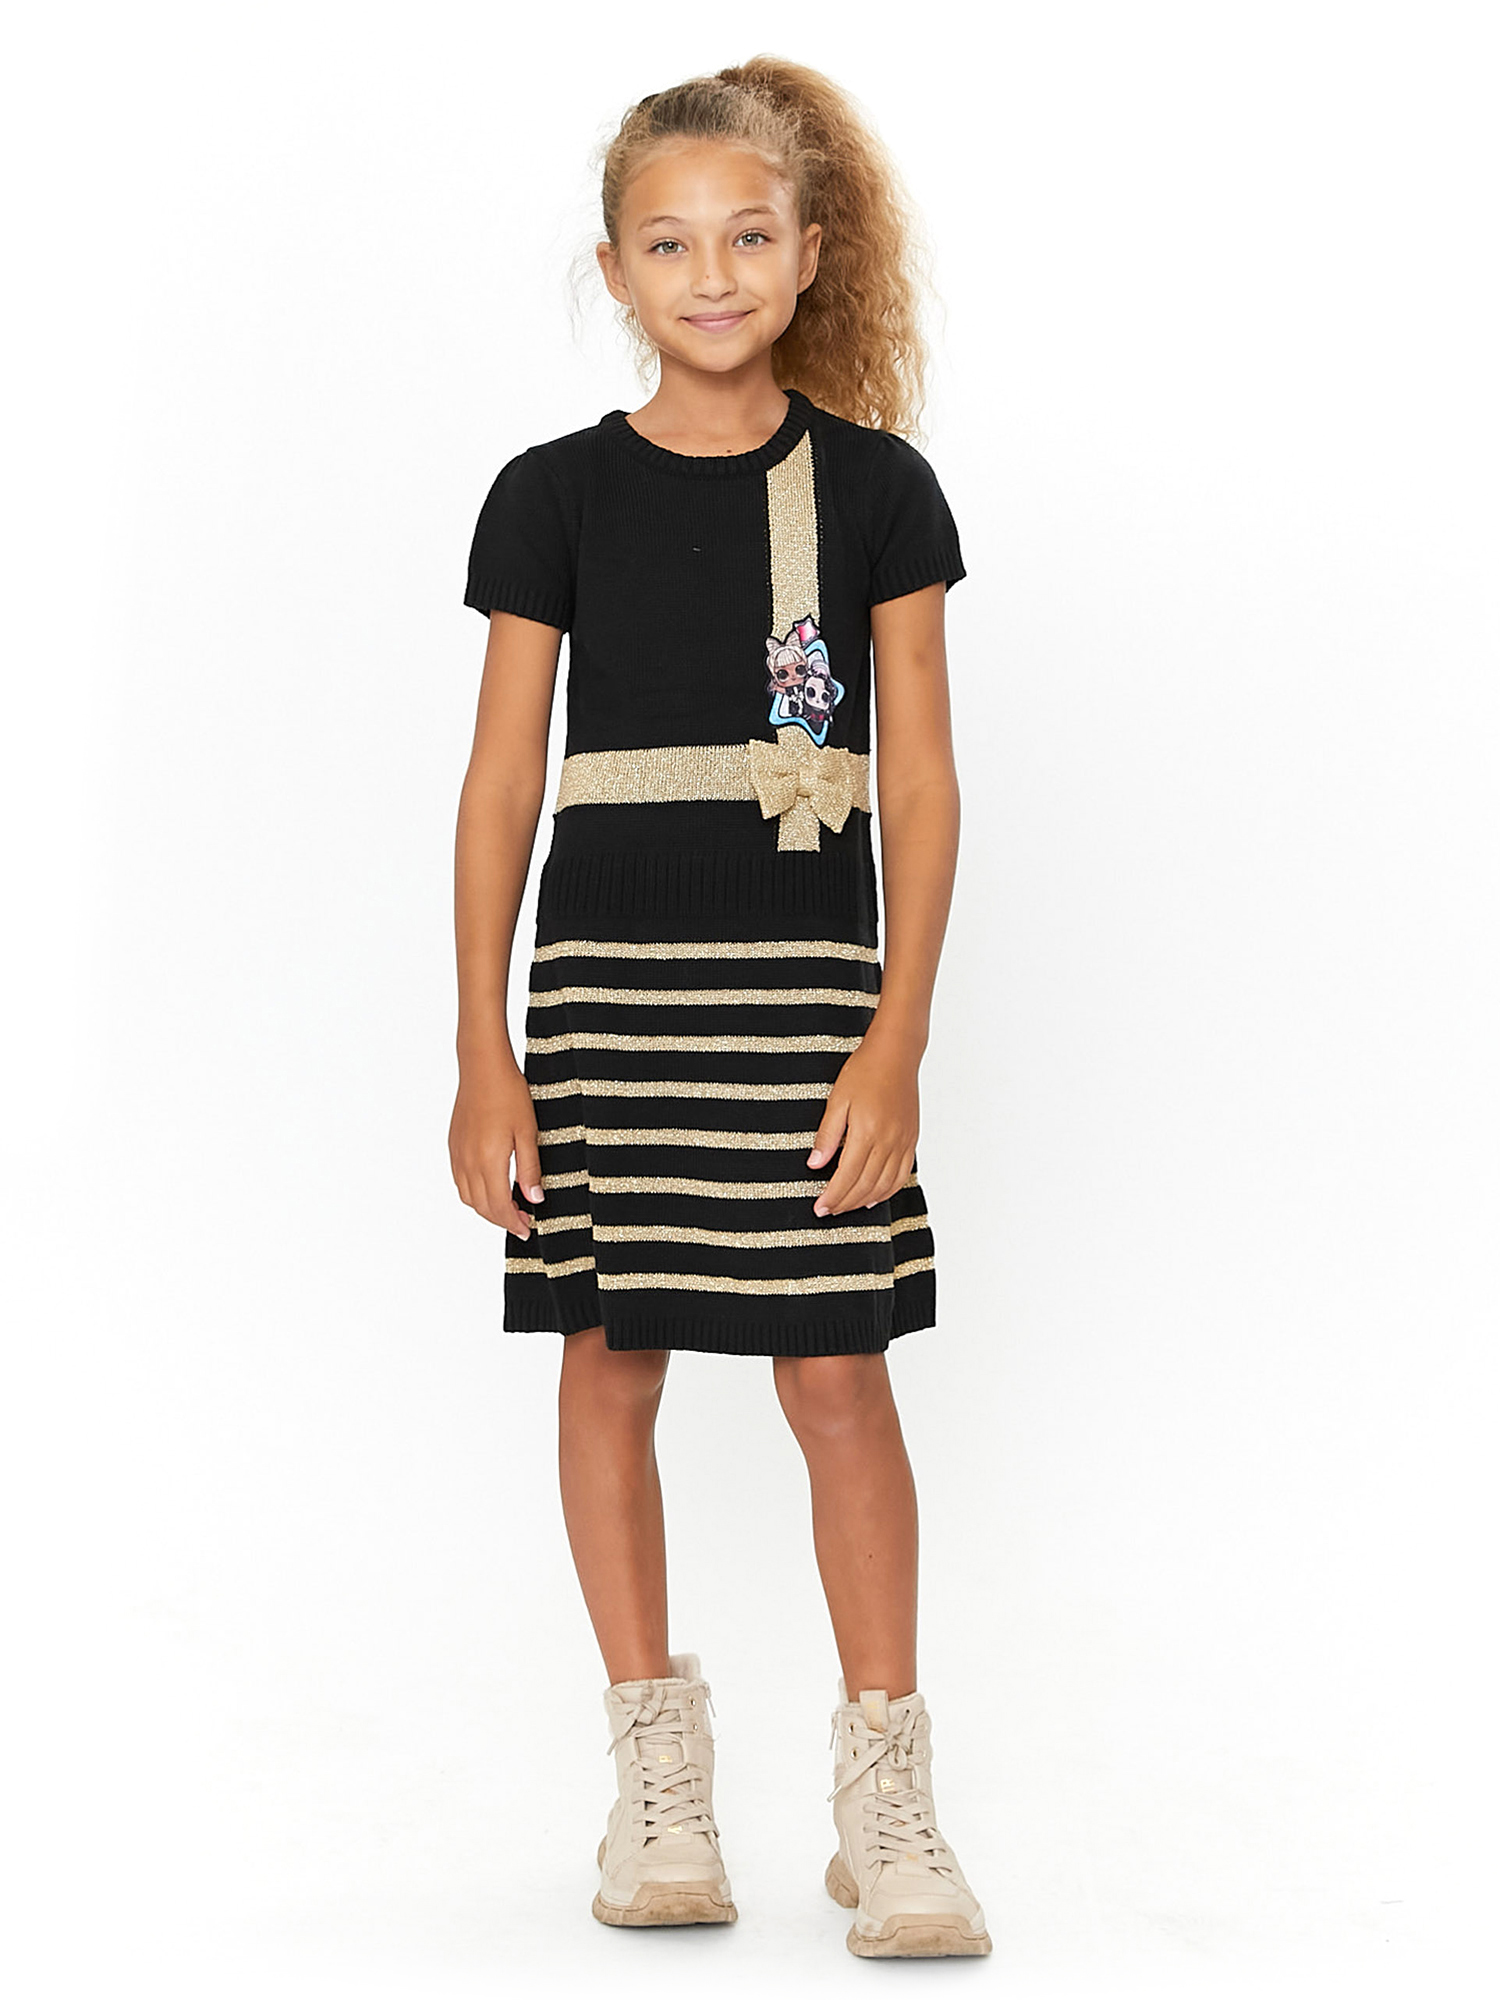 L.O.L. Surprise! Girls’ Sweater Dress, Sizes 4-16 - image 2 of 4